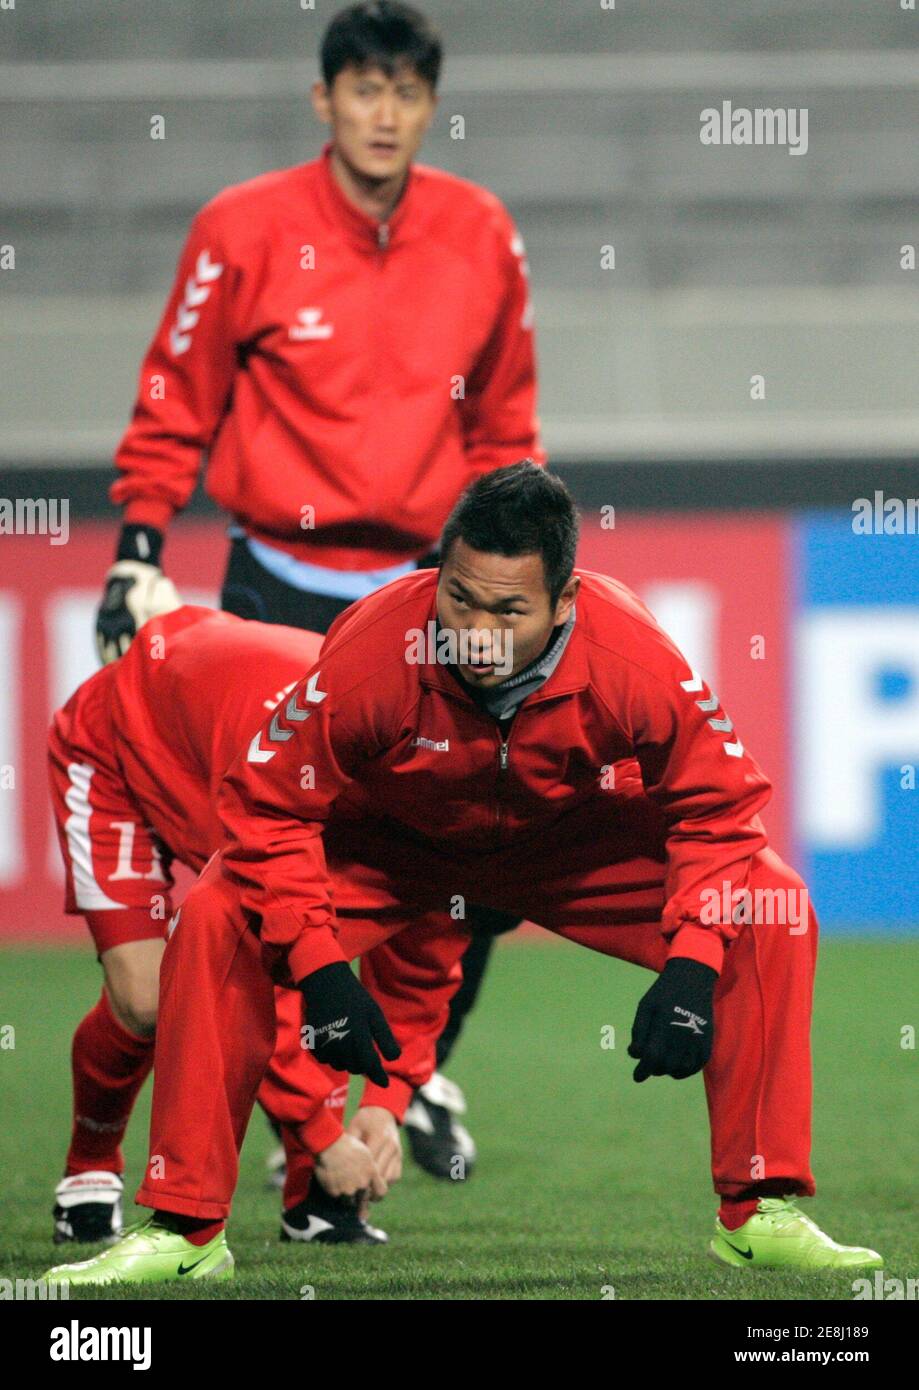 North Korean national soccer team striker Jong Tae-se (front) of Japan's club team Kawasaki Frontale warms up with his teammates during a training session for the 2010 FIFA World Cup Asia qualifying soccer match against South Korea at the Seoul World Cup Stadium March 31, 2009. While Pyongyang's planned rocket launch has put North Asia on edge and prompted the United States and Japan to deploy missile intercepting ships, the North Korean soccer team's arrival in Seoul for a World Cup qualifier has barely registered on the radar. The two Koreas will play the match on April 1, 2009.  REUTERS/Jo  Stock Photo